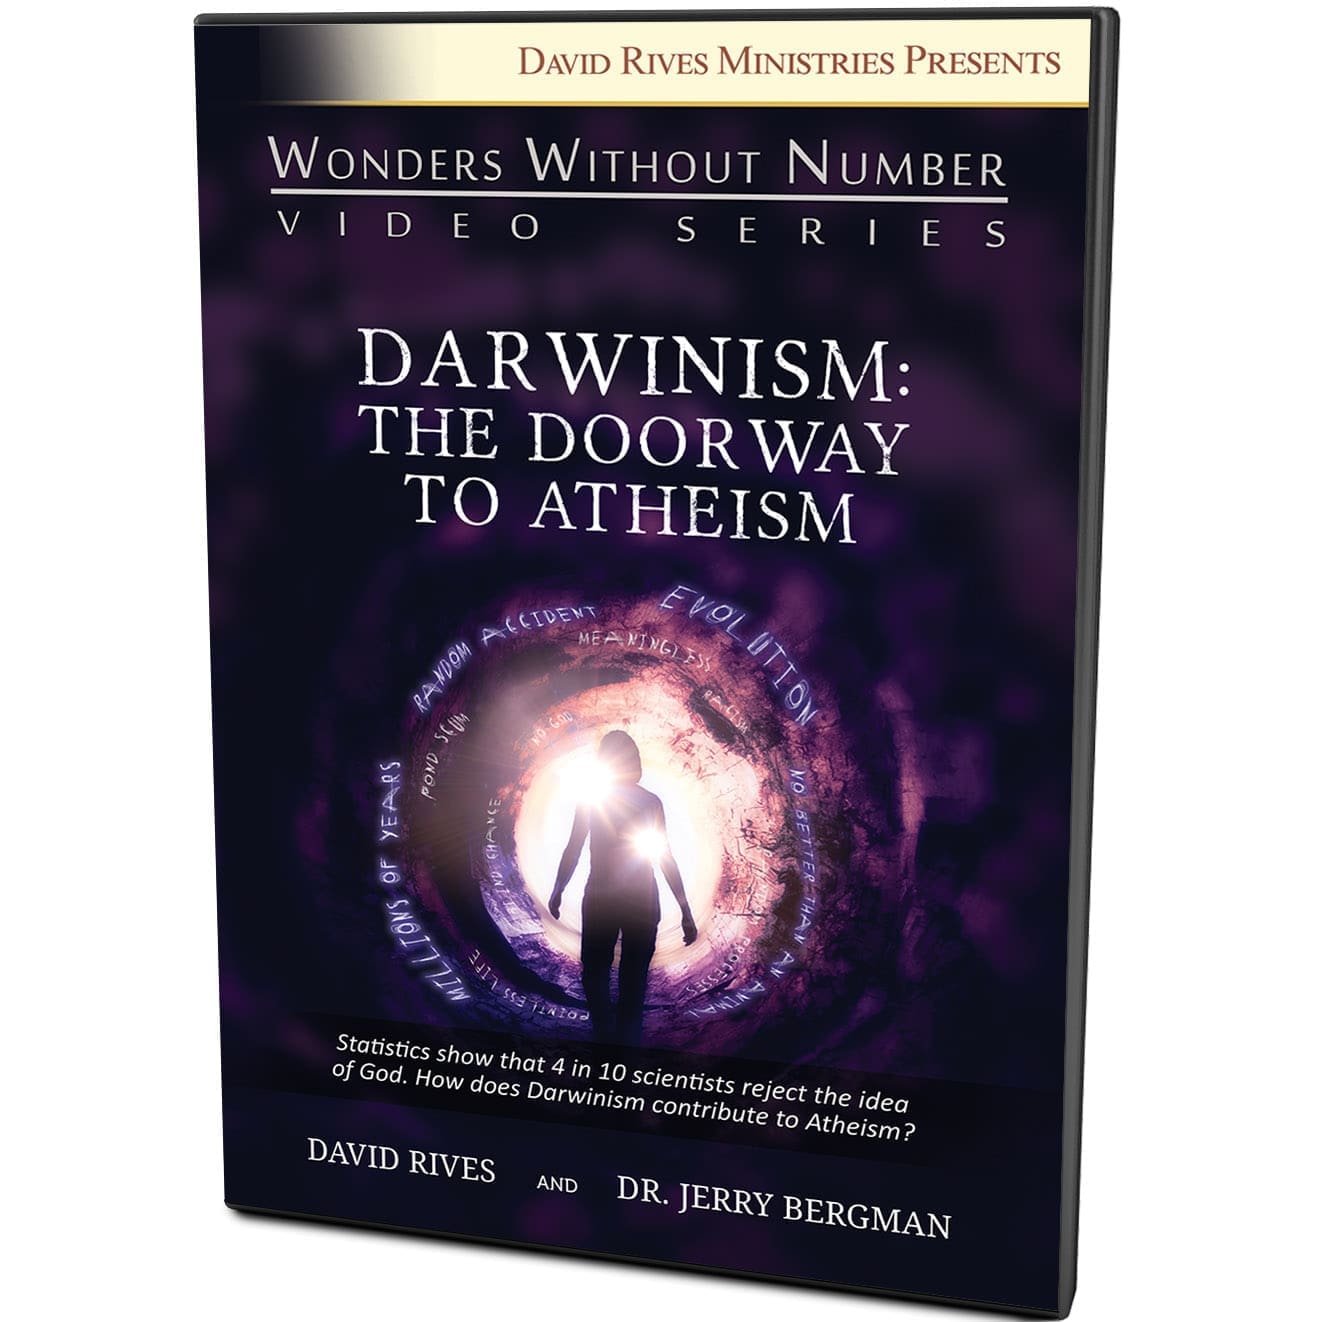 Darwinism: The Doorway To Atheism by David Rives & Dr. Jerry Bergman | Wonders Without Number Video